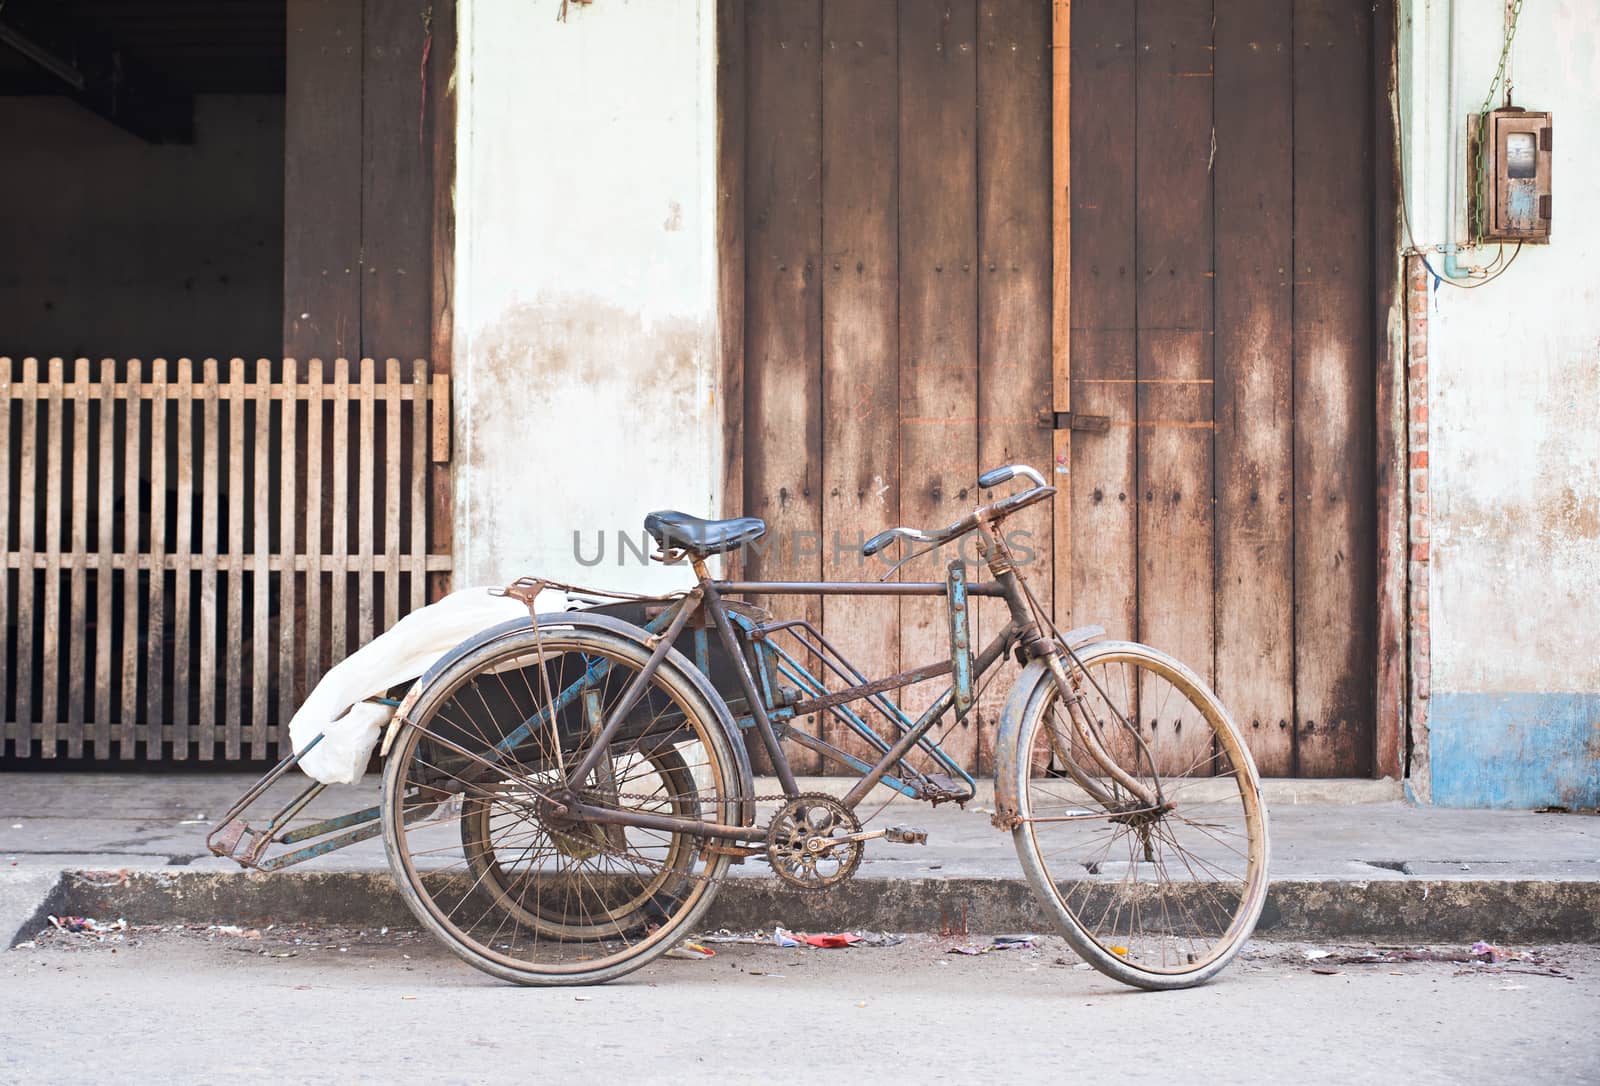 Old, rusty cyclo in front of a warehouse at a street in Myeik, Myanmar.